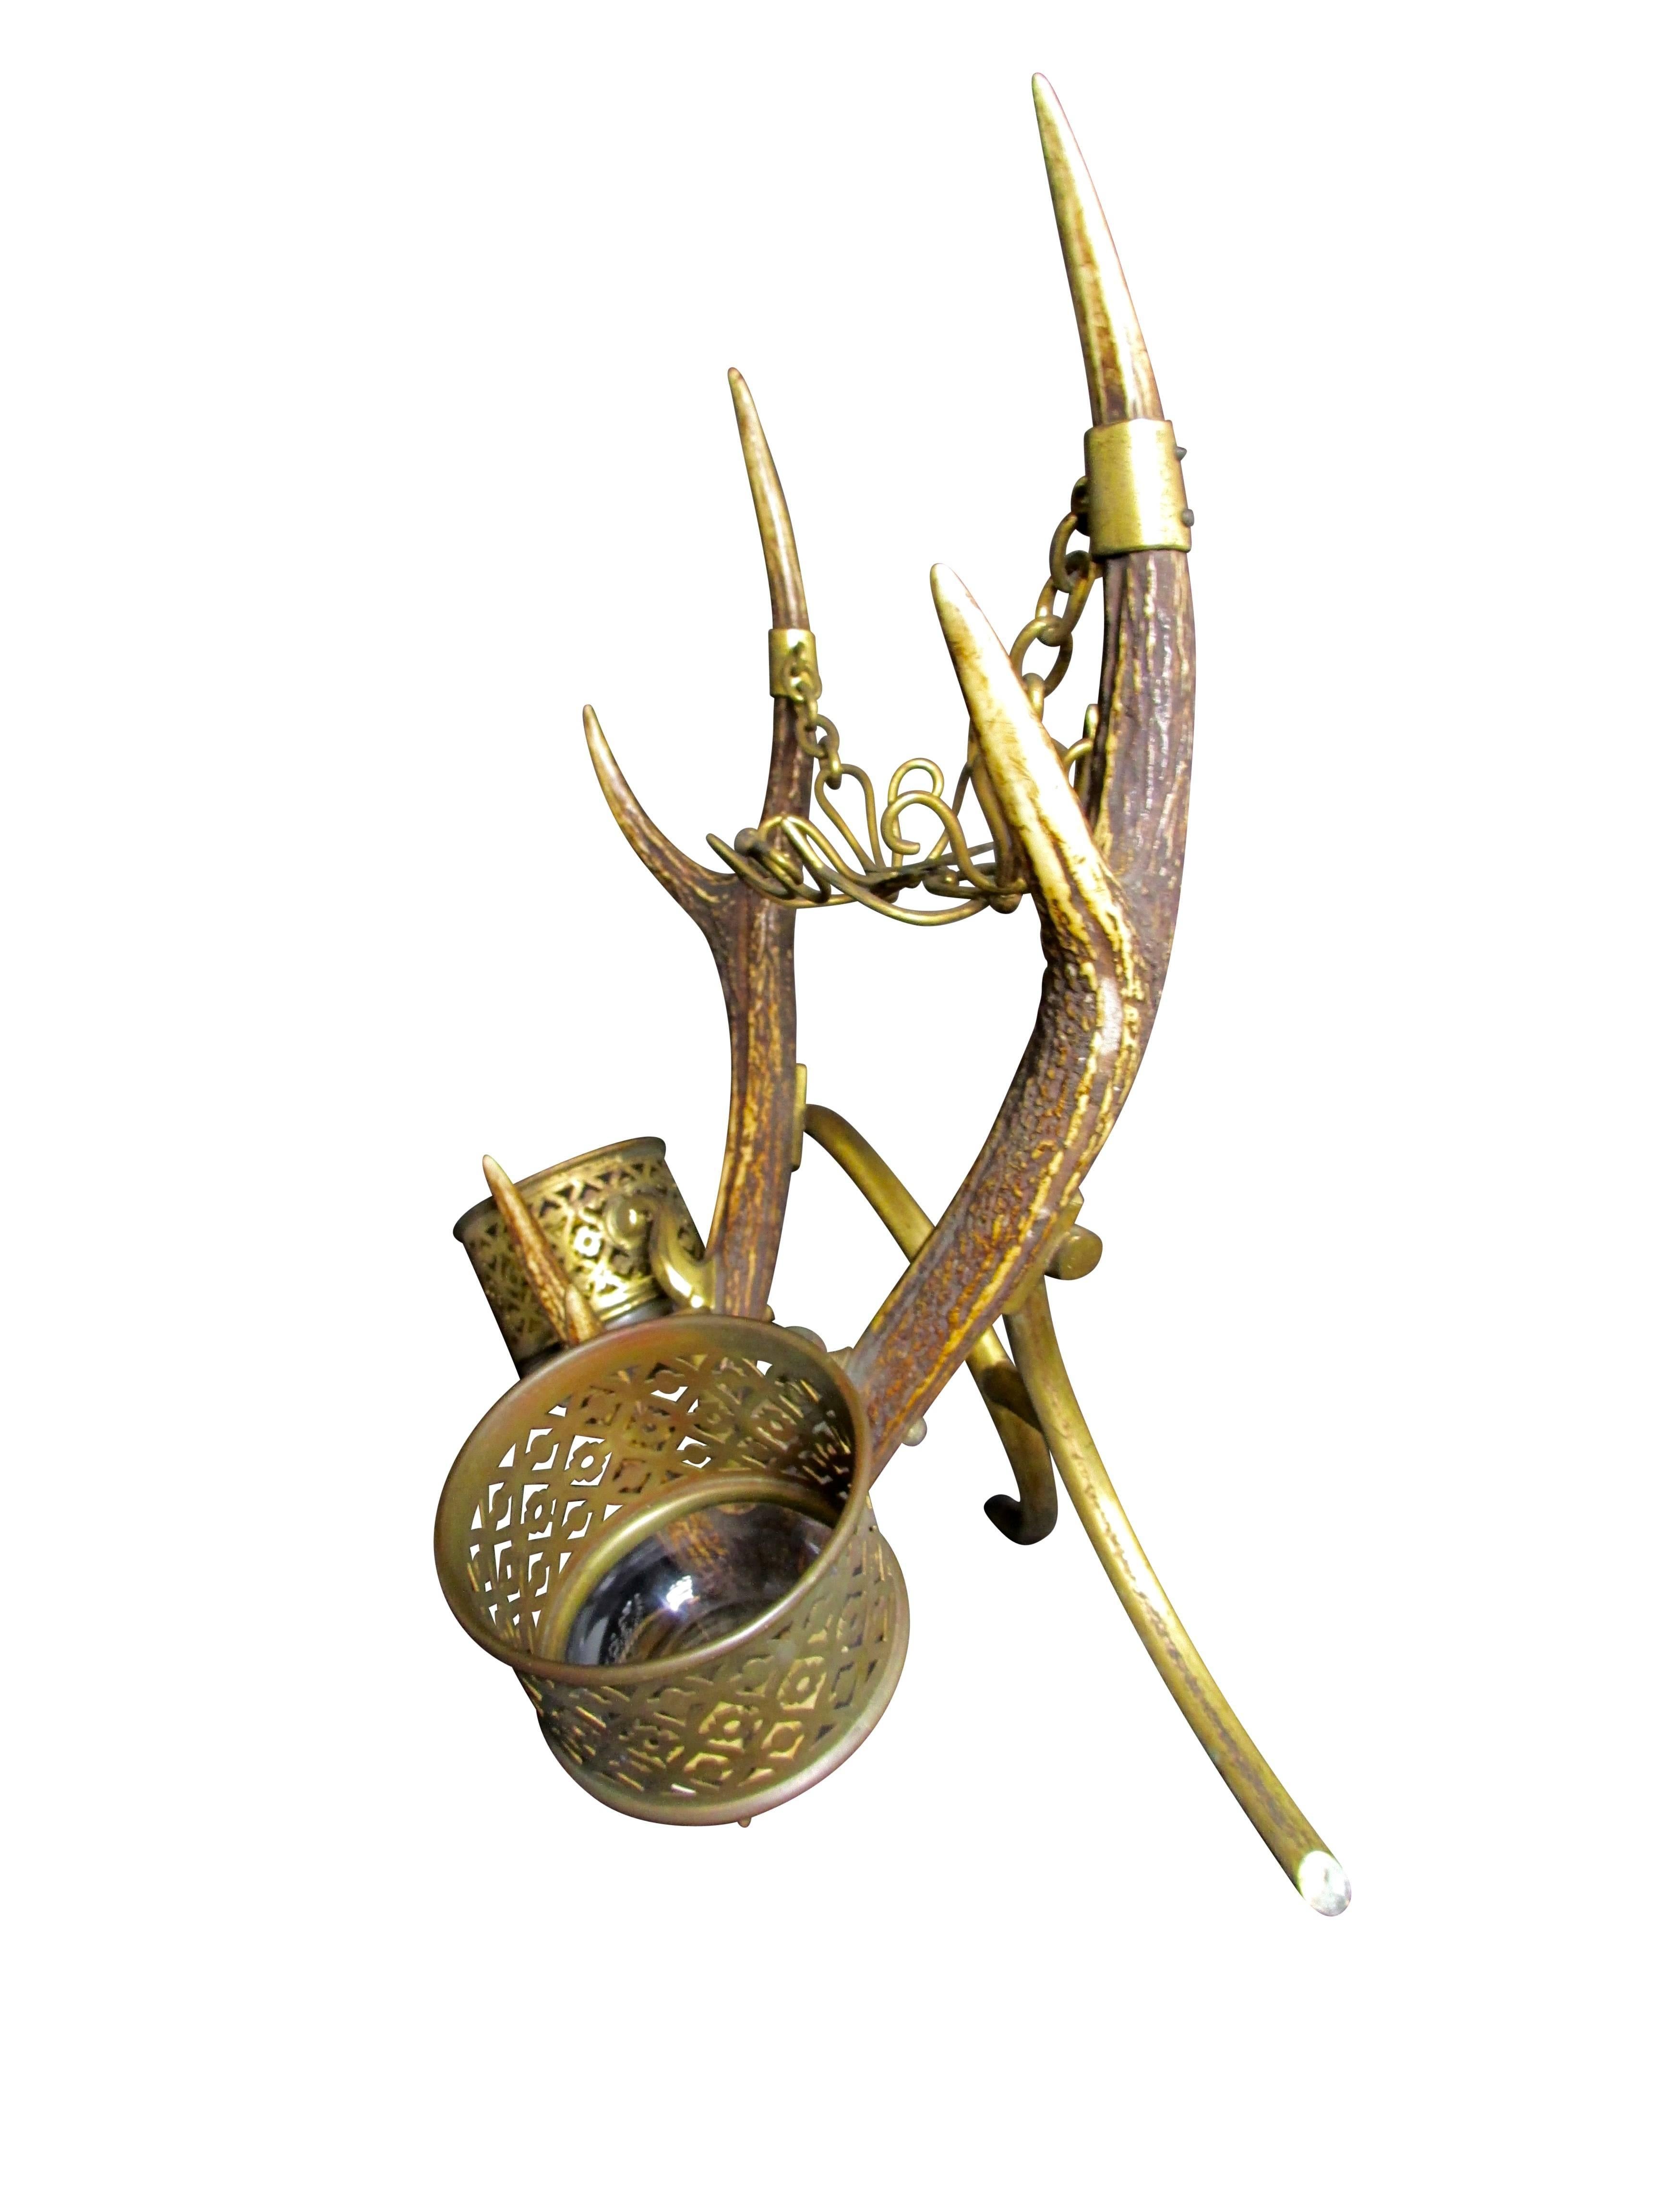 This is a one of a kind shaving stand made of deer antlers, brass, and glass. Mounted on each horn are glass cups with lovely brass detail. Suspended on chain between the two horns is a cradle to hold a bar of soap. At the base of the stand is a